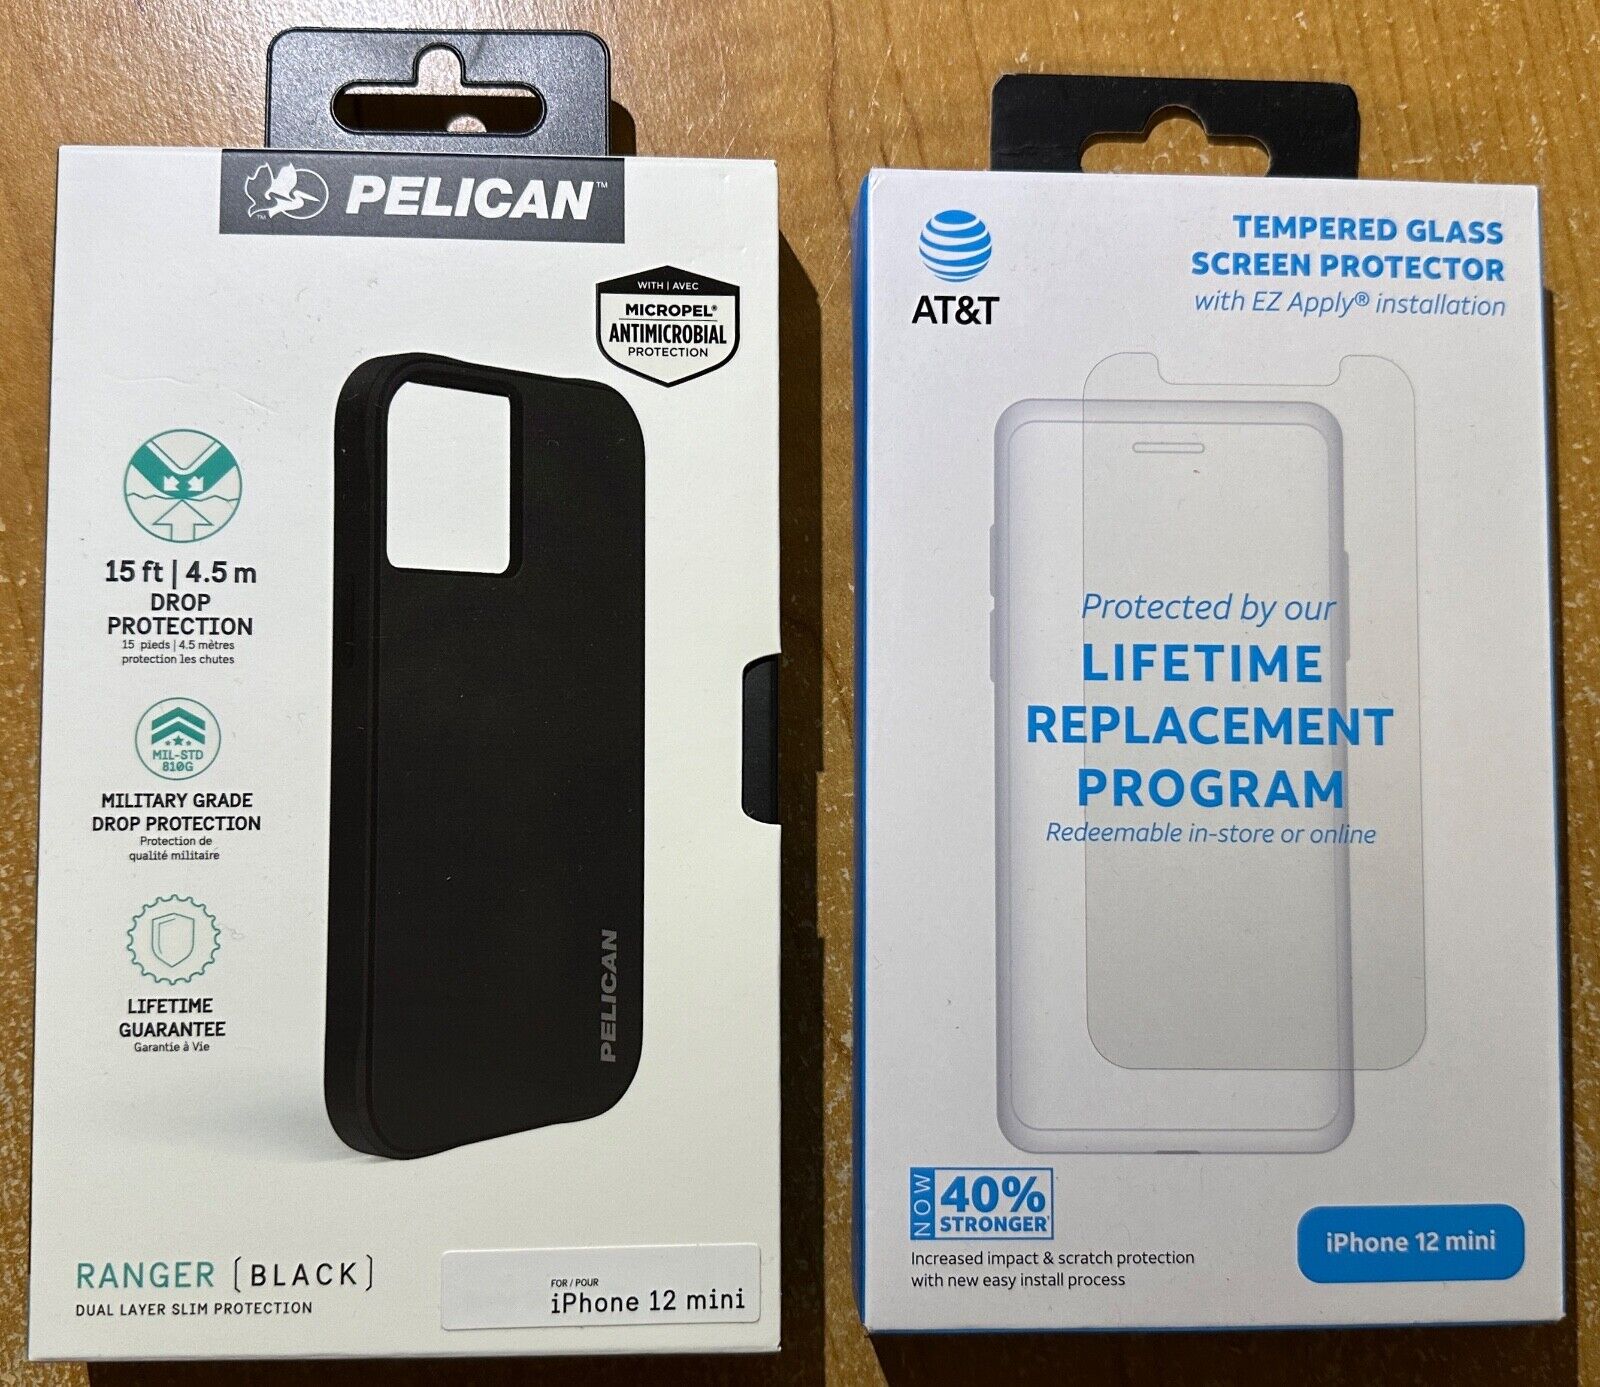 Pelican Ranger Slim Case & AT&T Glass Screen Protector for iPhone 12 Mini (5.4